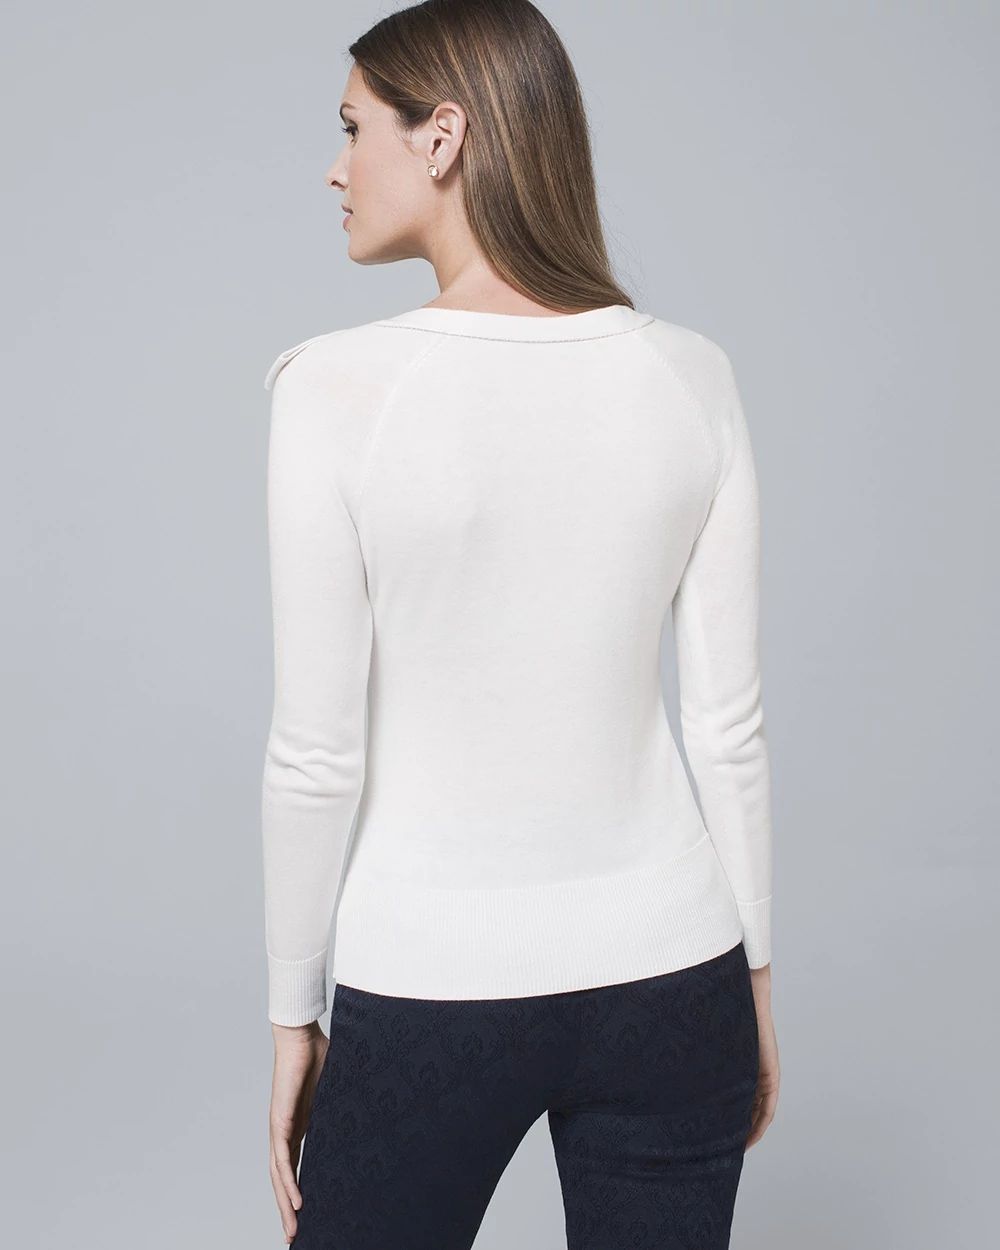 Bow-Shoulder Raglan Sweater click to view larger image.